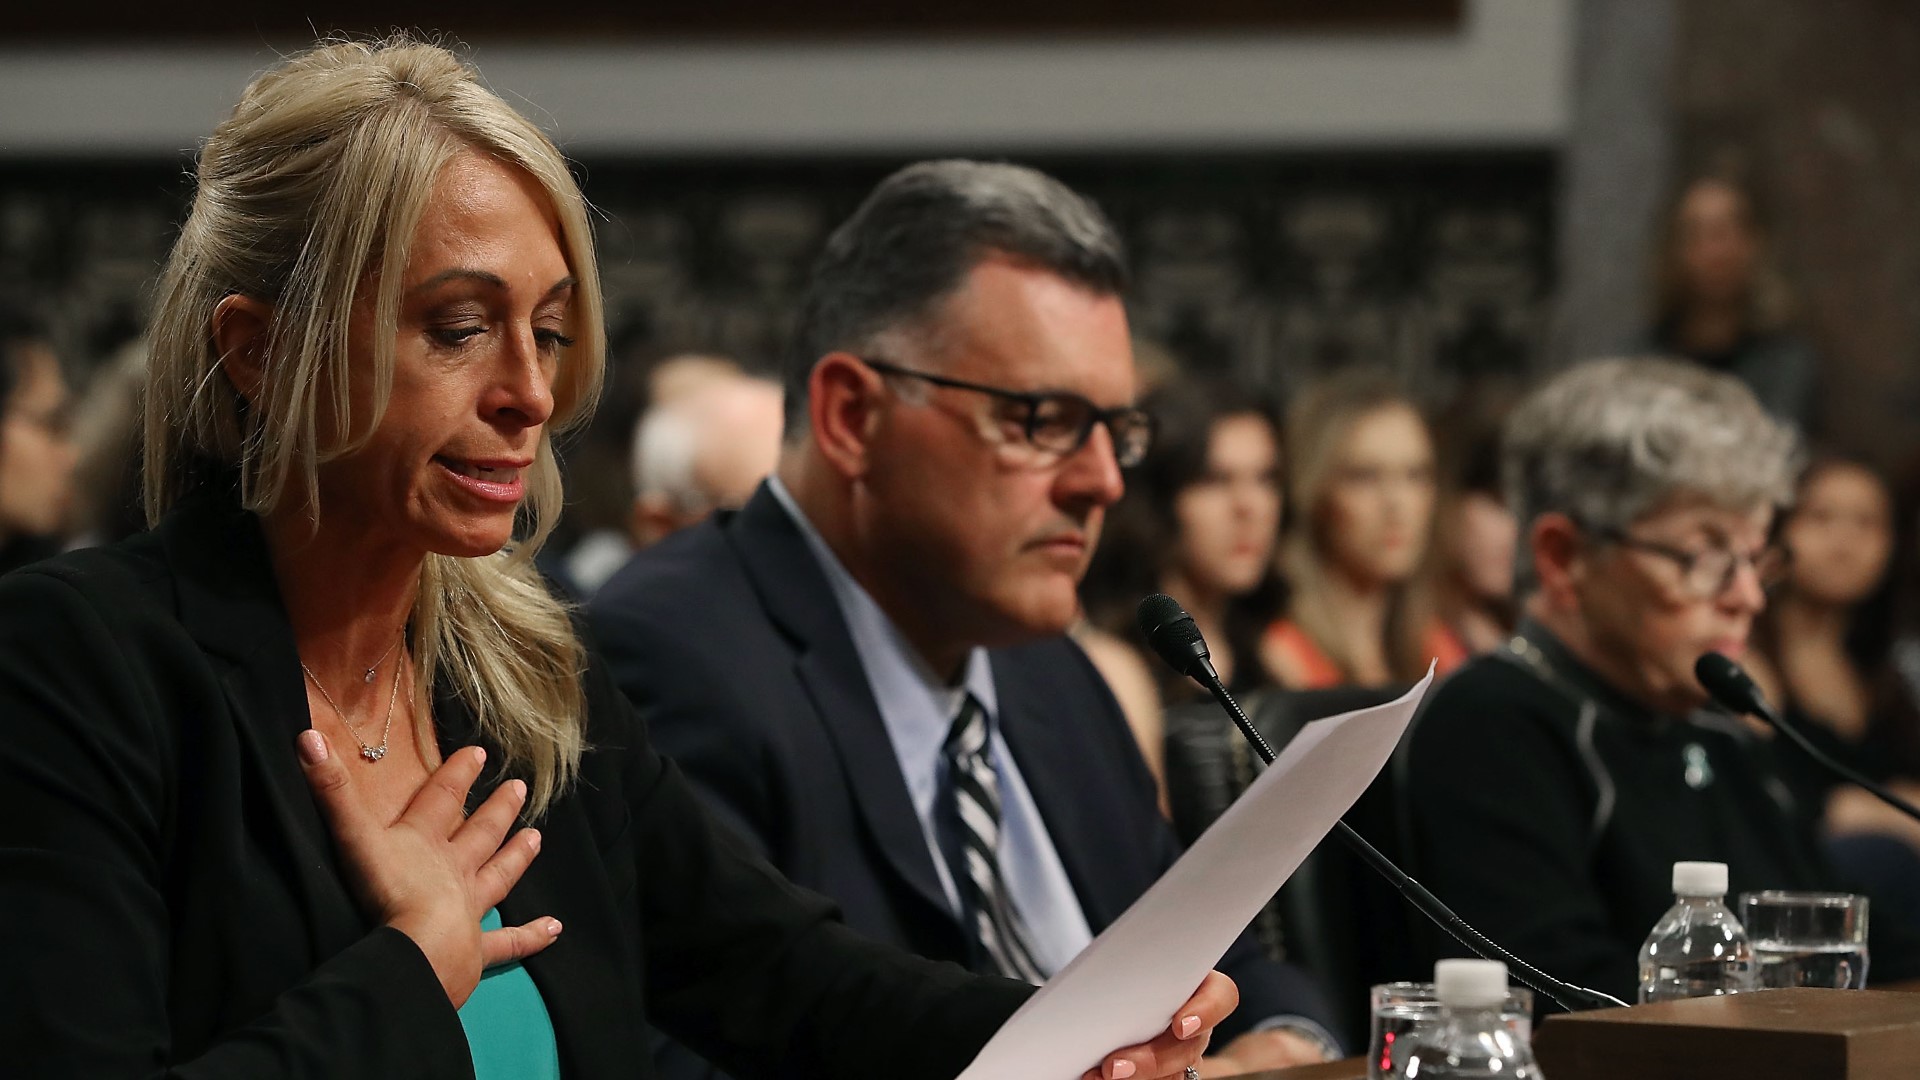 Just days after hiring former USA Gymnastics executive Rhonda Faehn, University of Michigan ended its relationship with her.